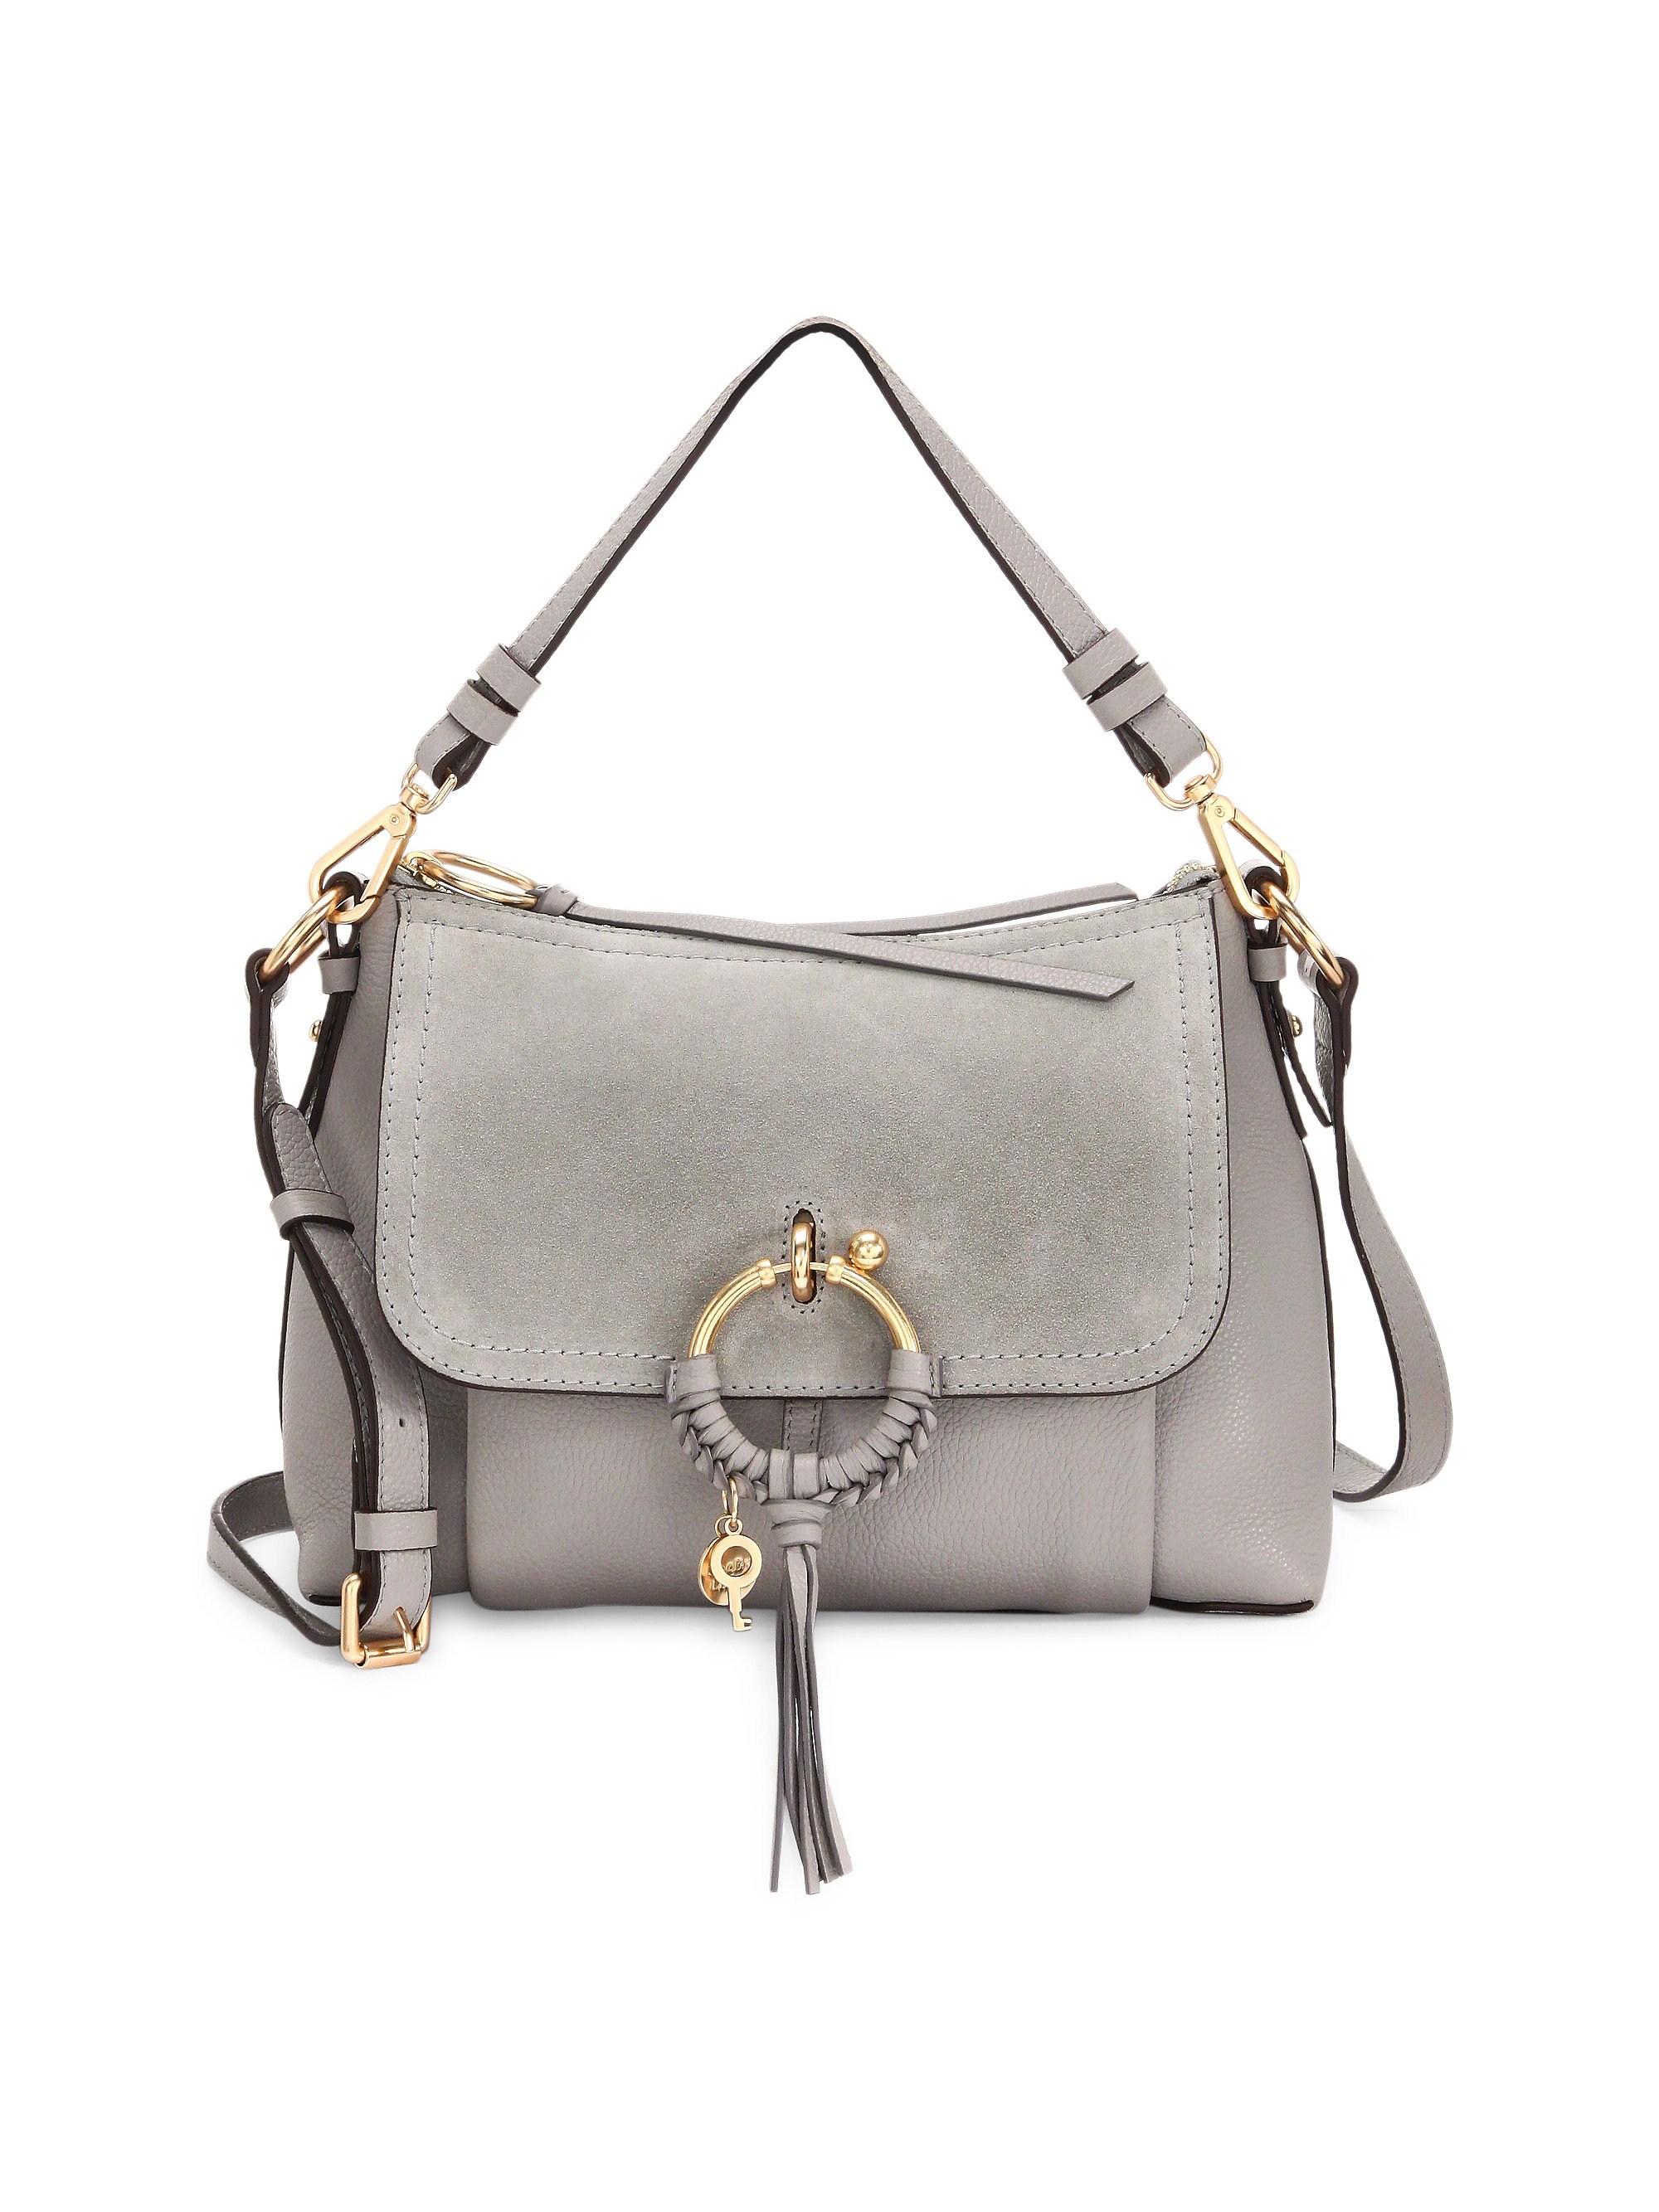 Lyst - See By Chloé Small Joan Leather Shoulder Bag in Gray